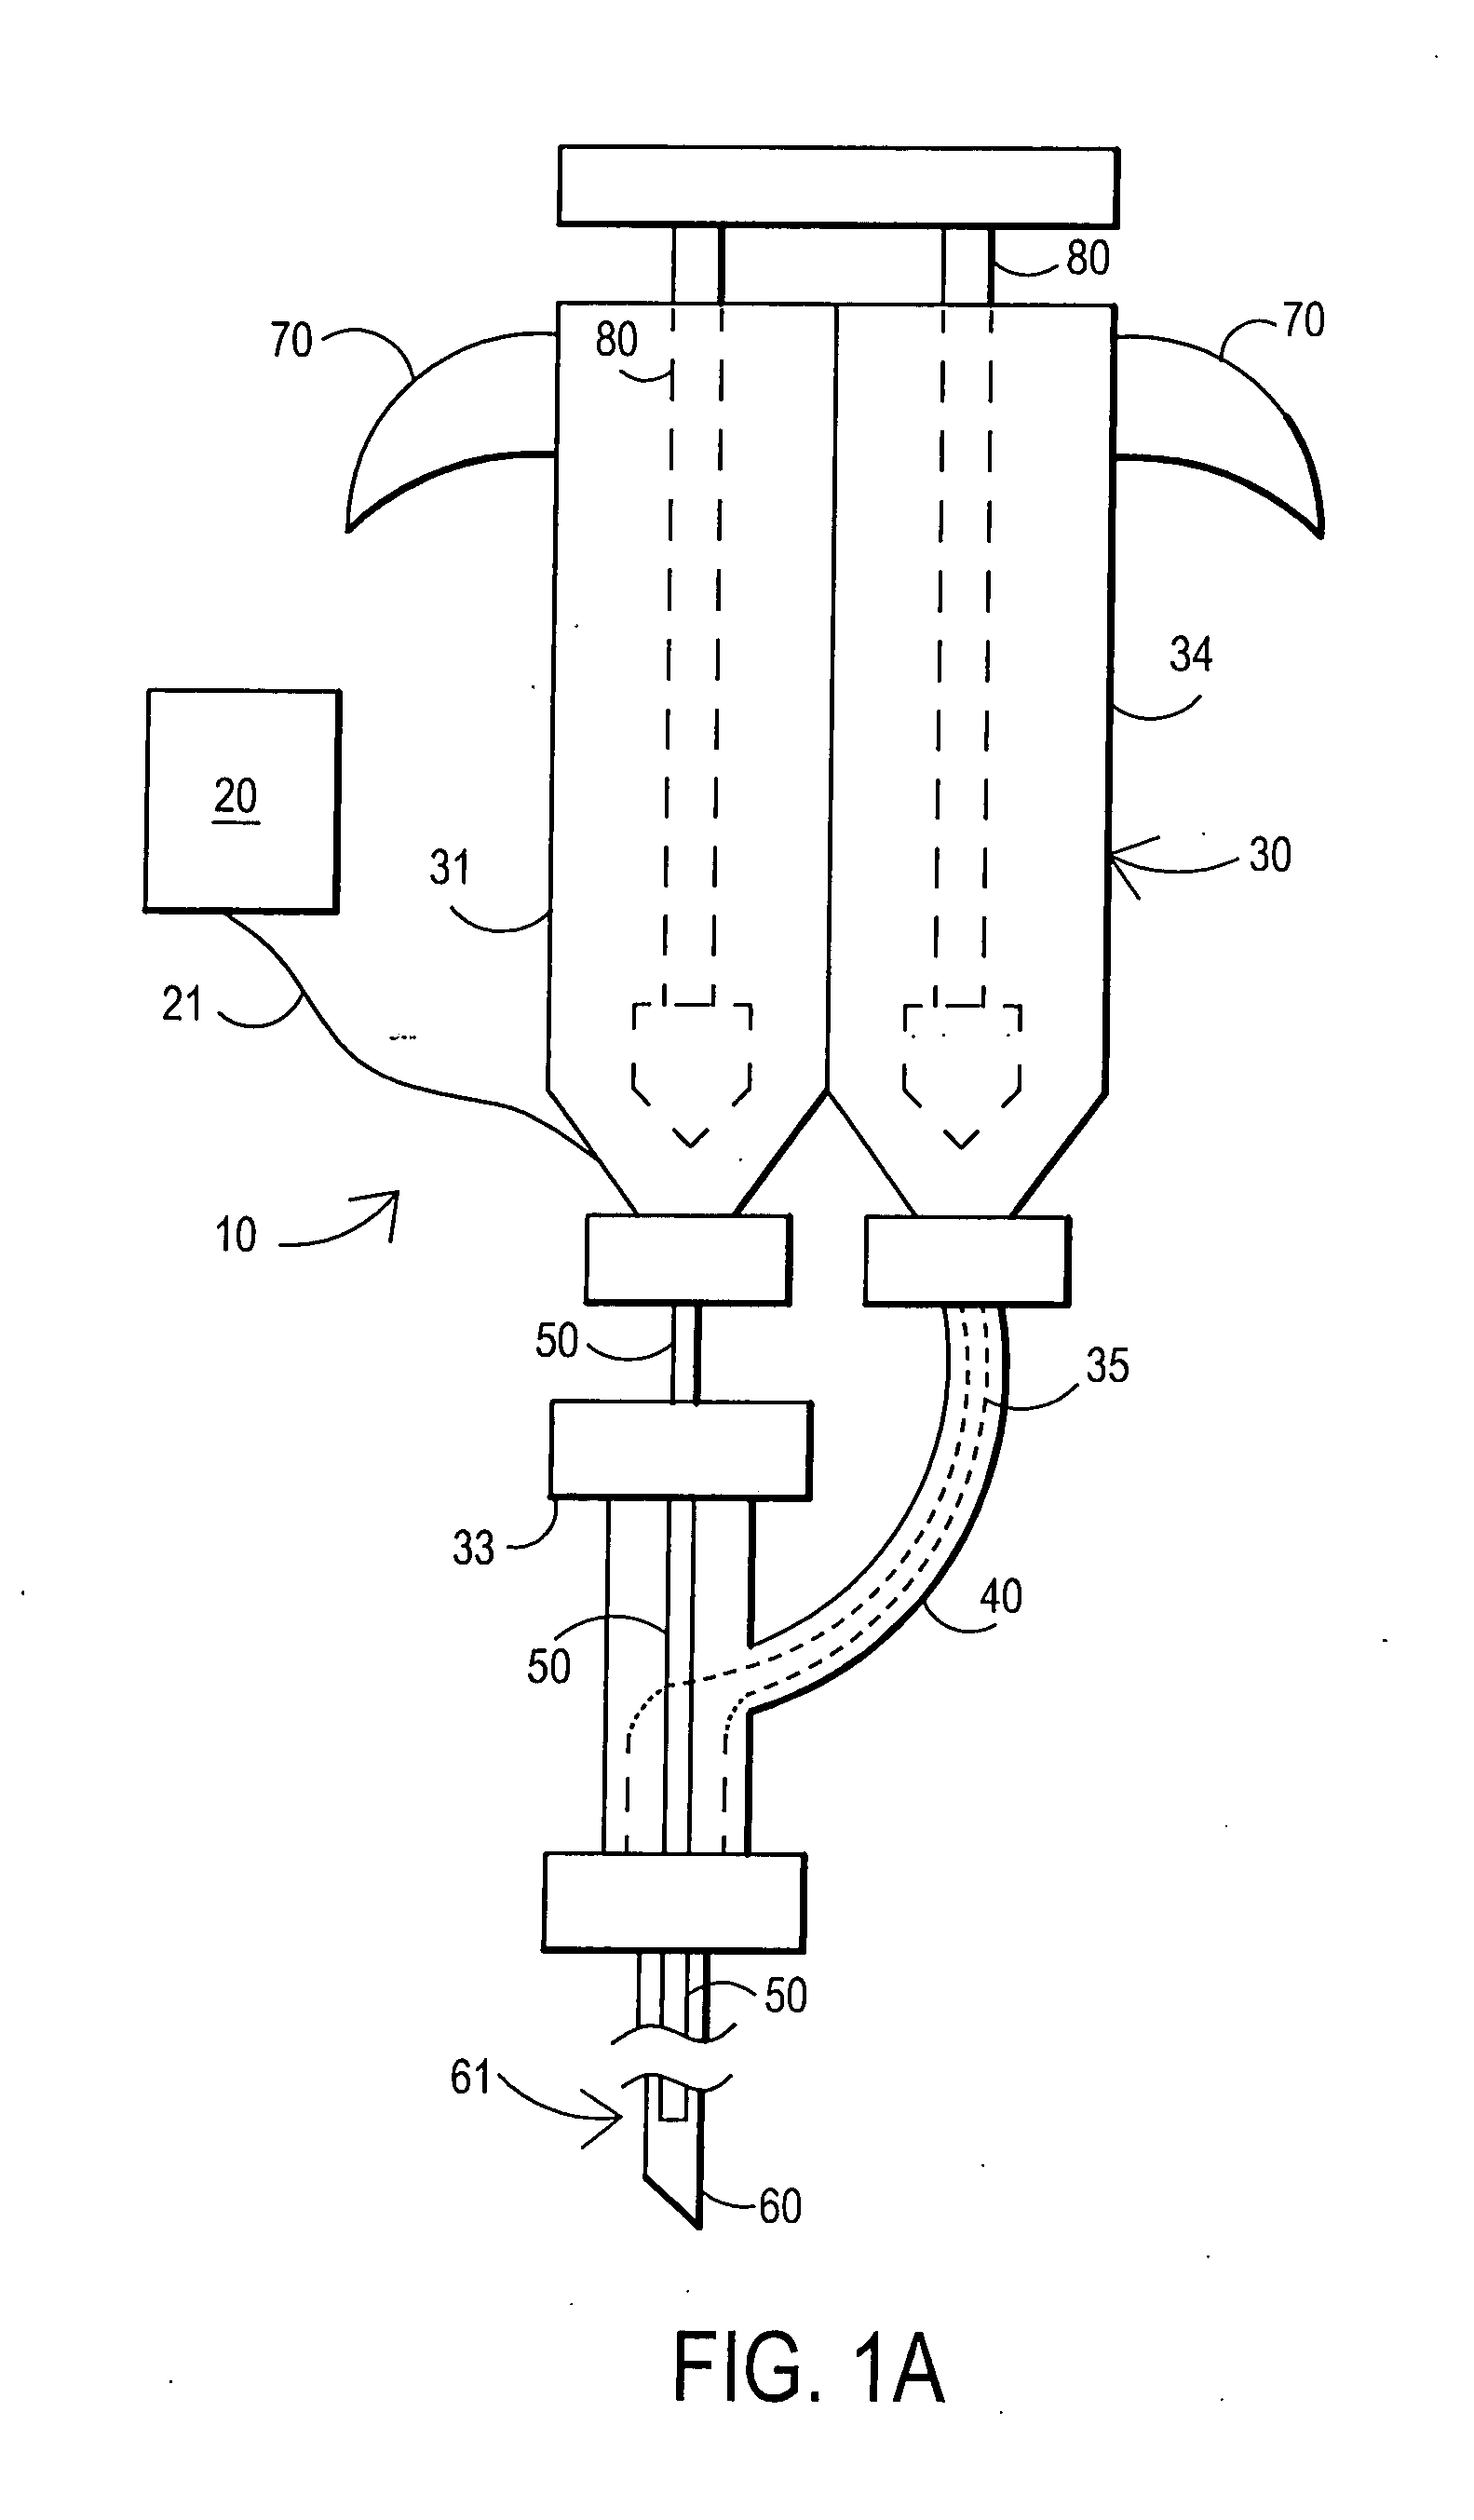 Fibrin sealant delivery device including pressure monitoring, and method and kits thereof